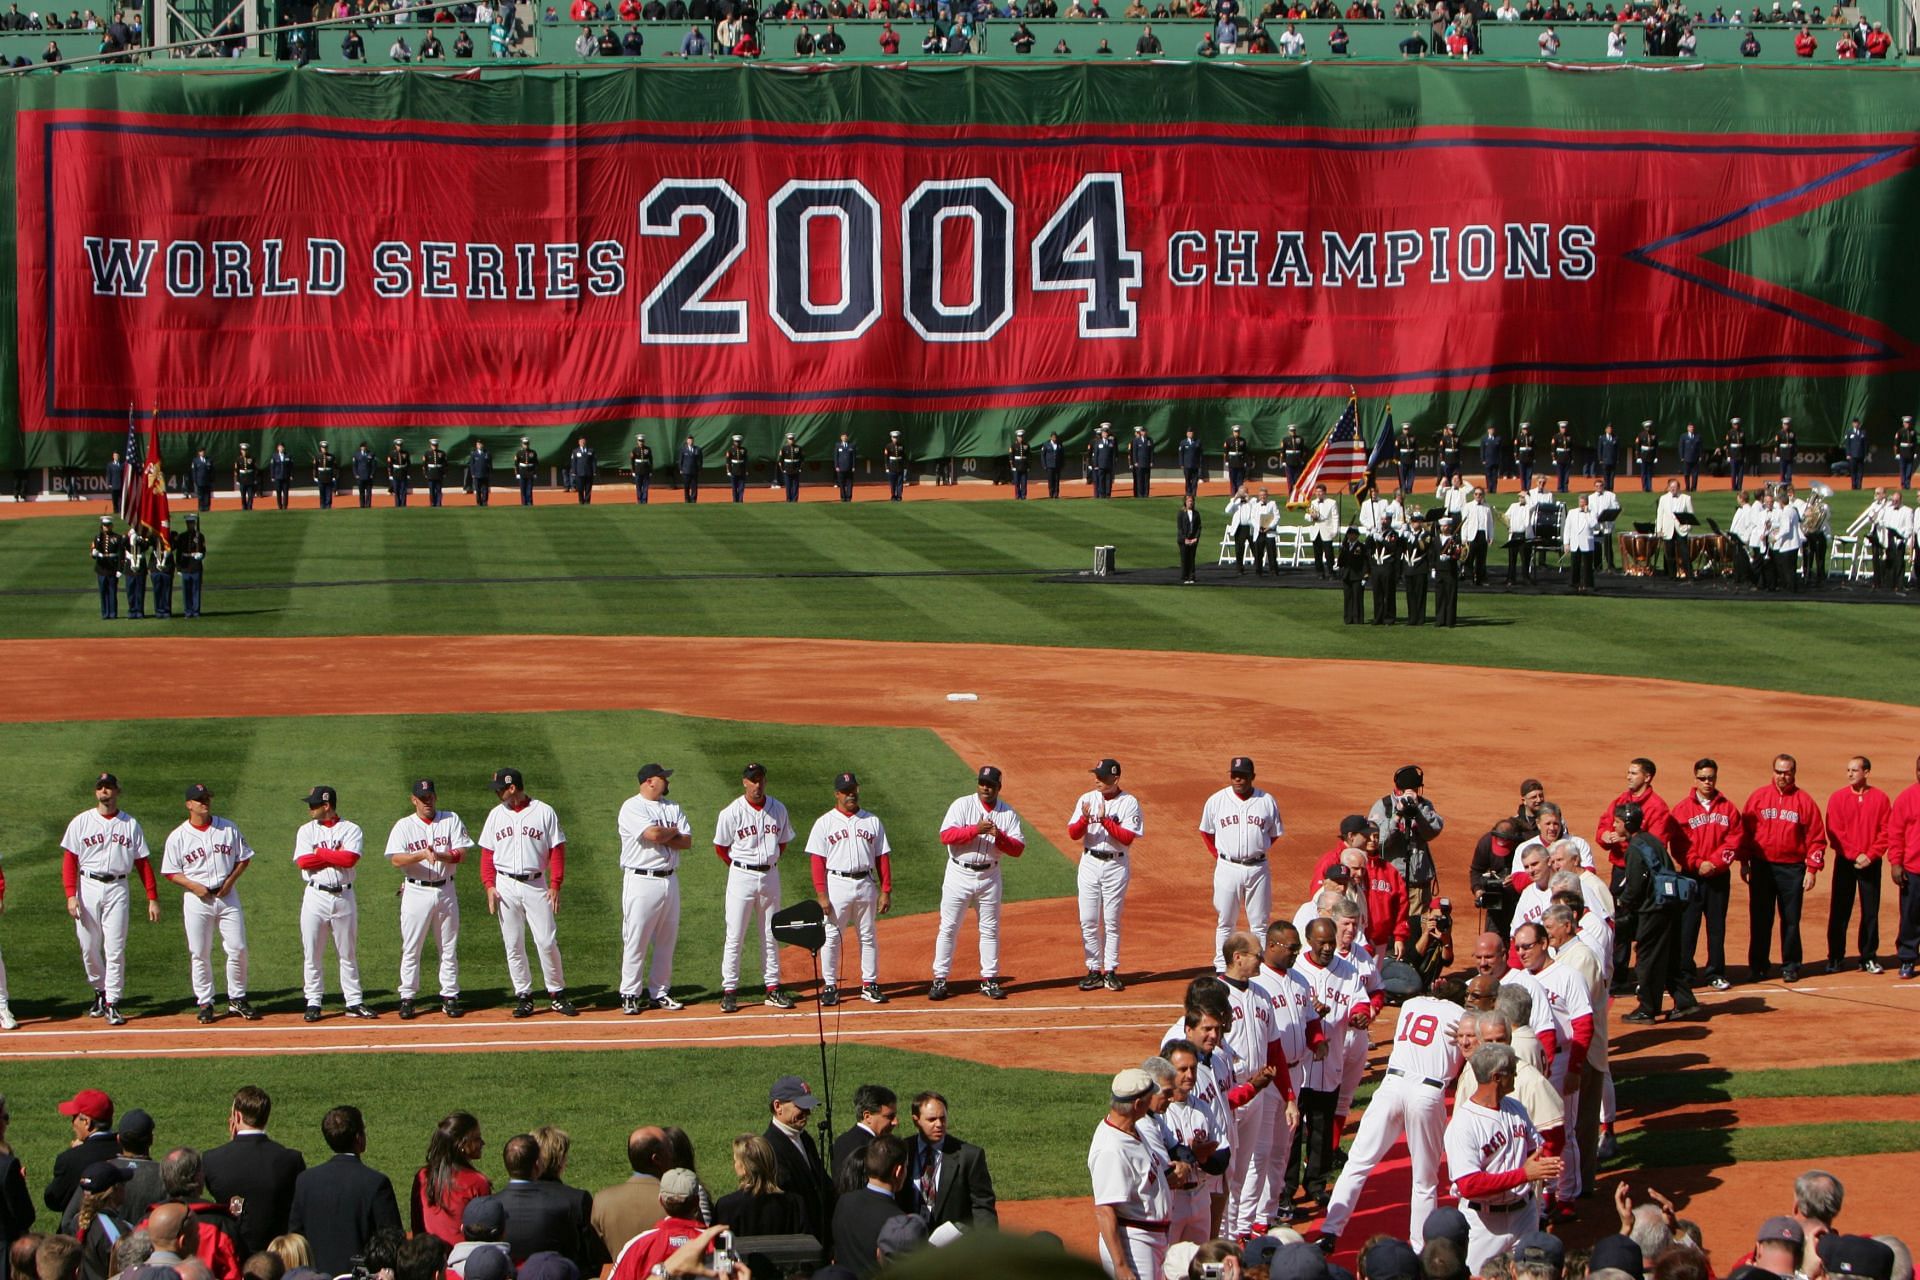 Red Sox celebrate their 2004 World Series Championship during a pre-game ceremony prior to the game against Derek Jeter&#039;s New York Yankees at Fenway Park on April 11, 2005